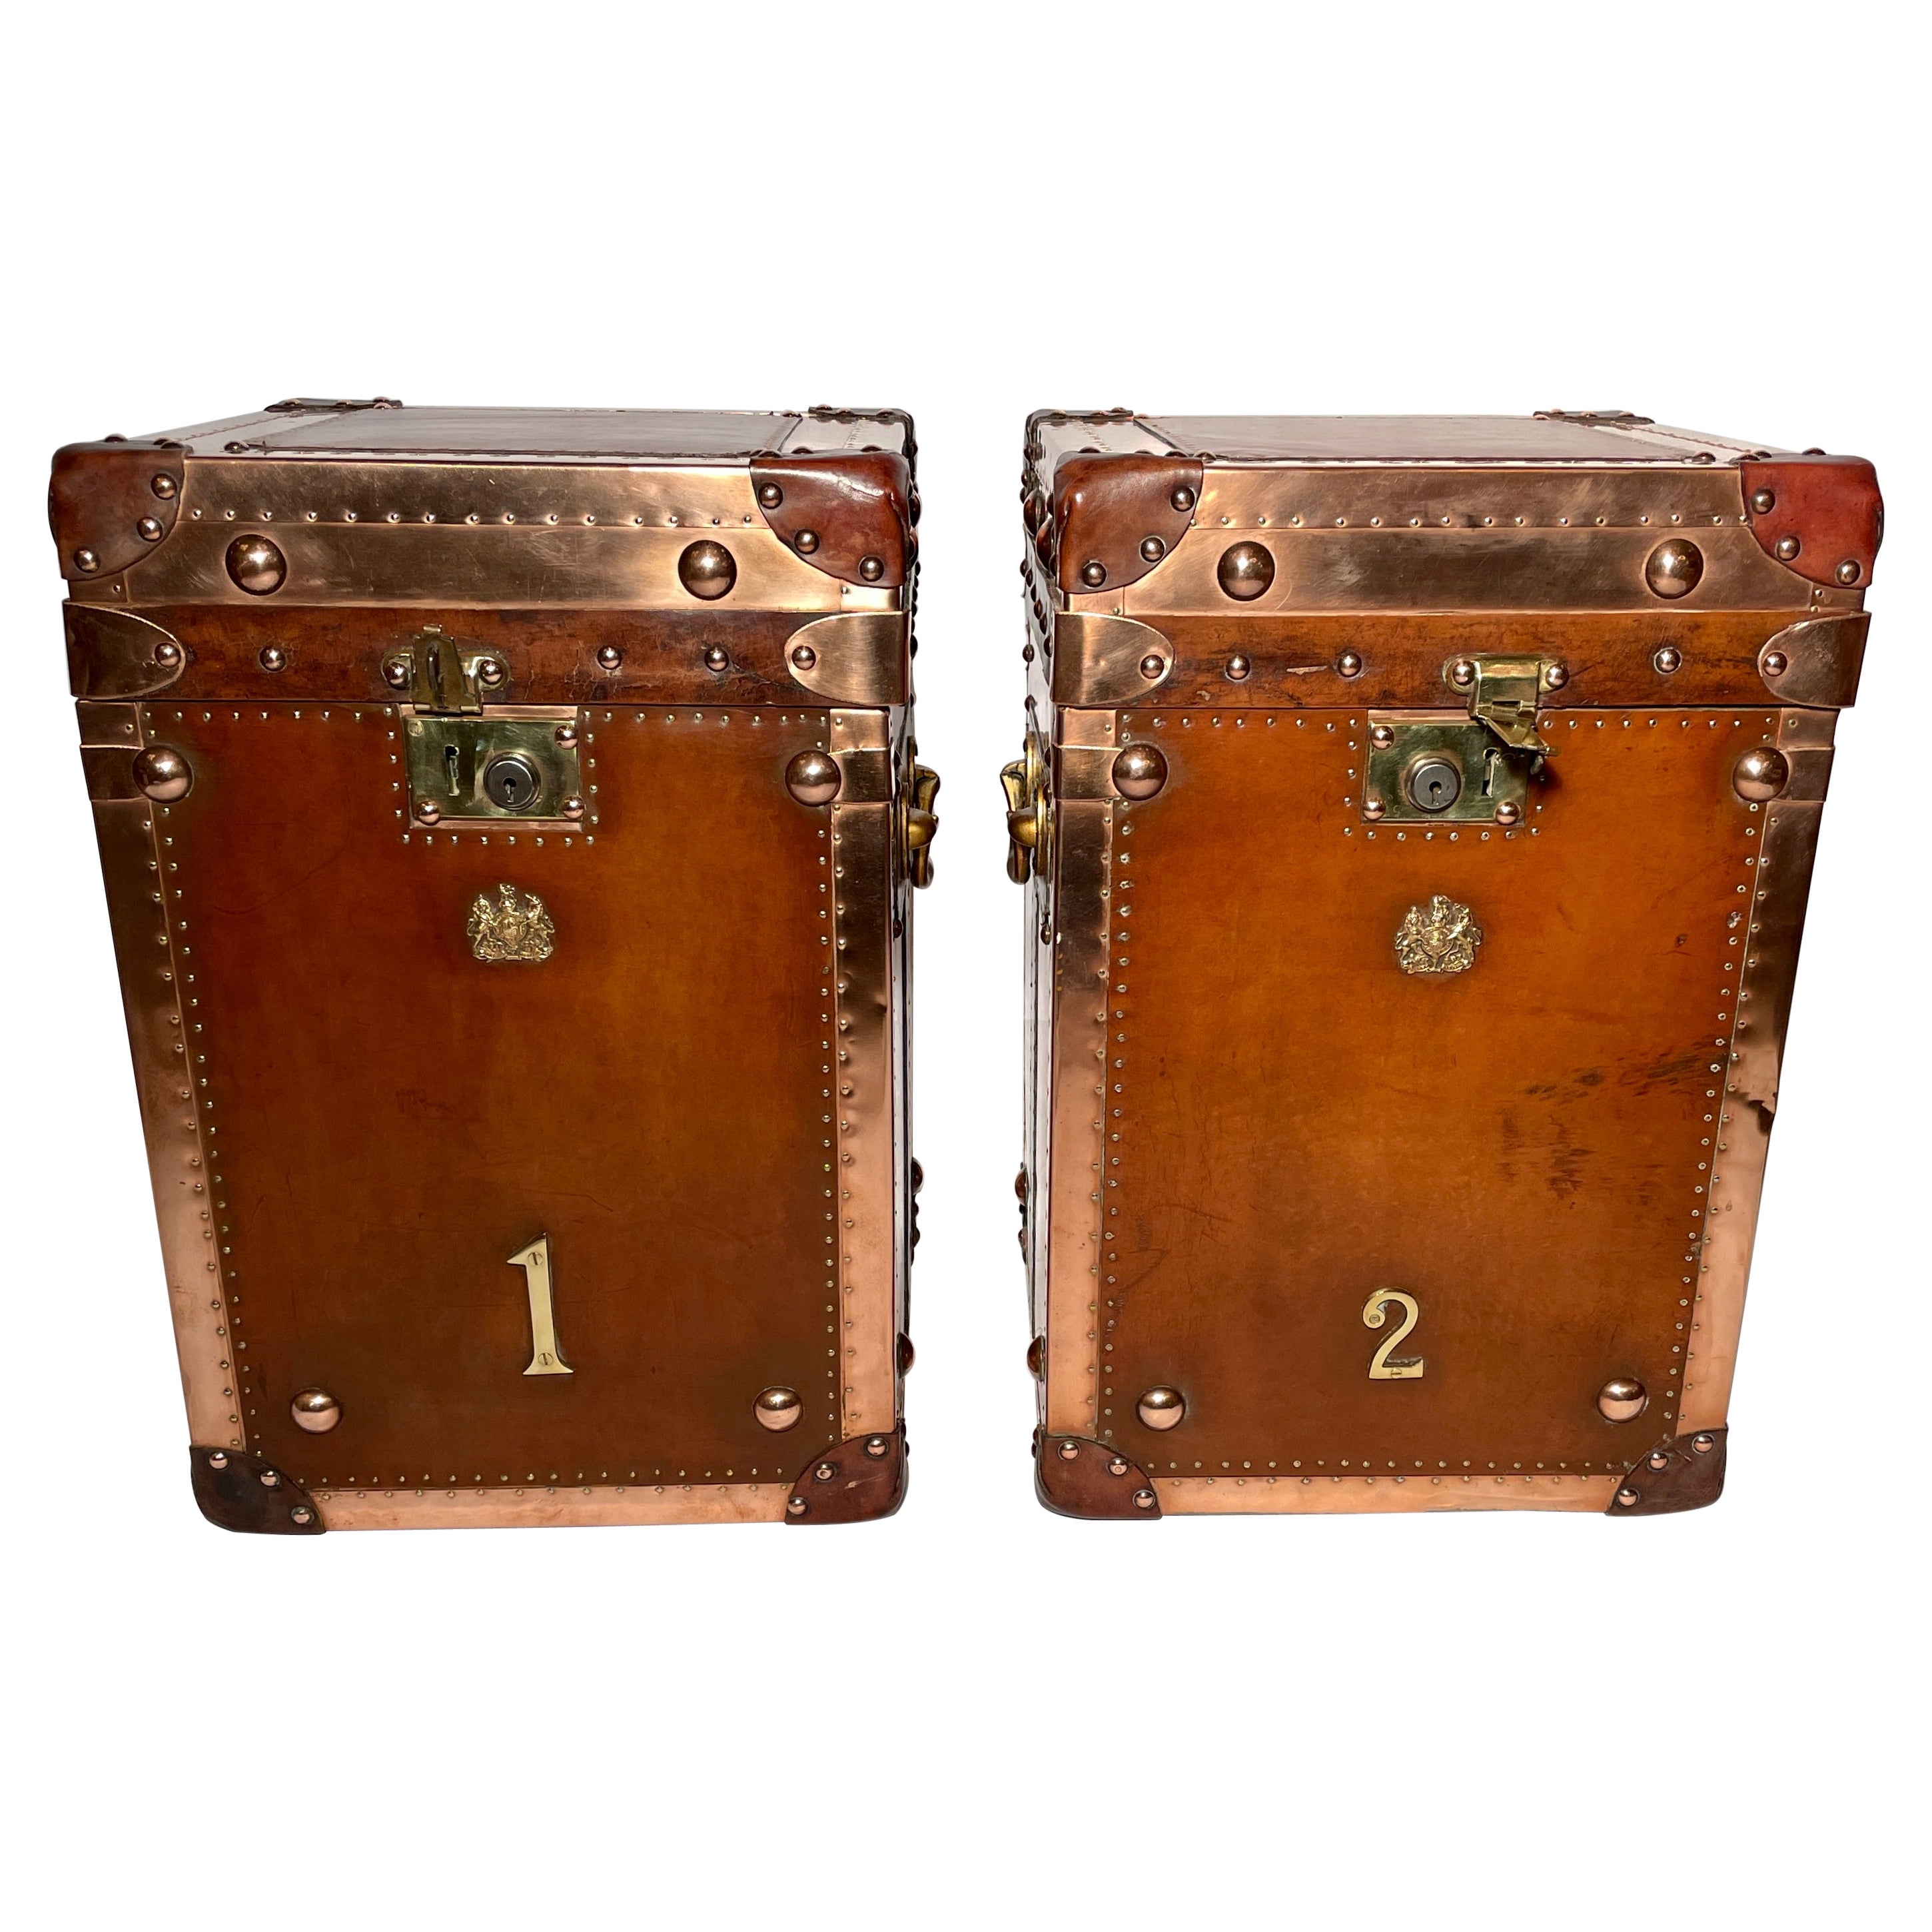 Pair Antique British Copper & Leather Trunks w/ Royal Corps of Marines Insignia